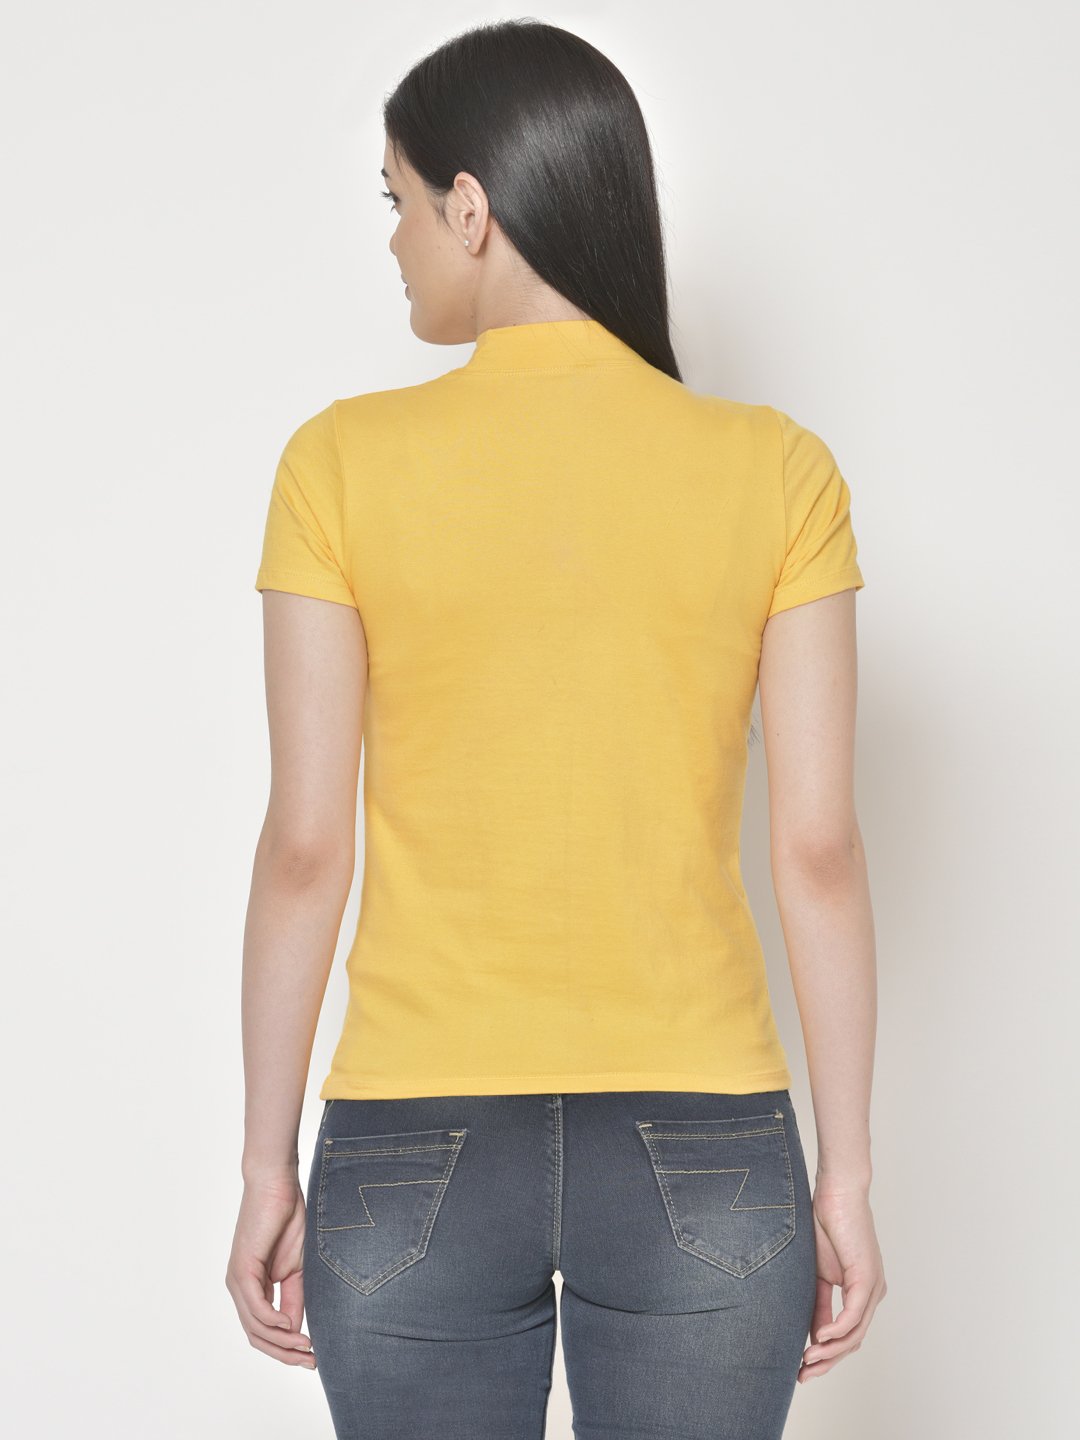 Cation Yellow Cotton Top